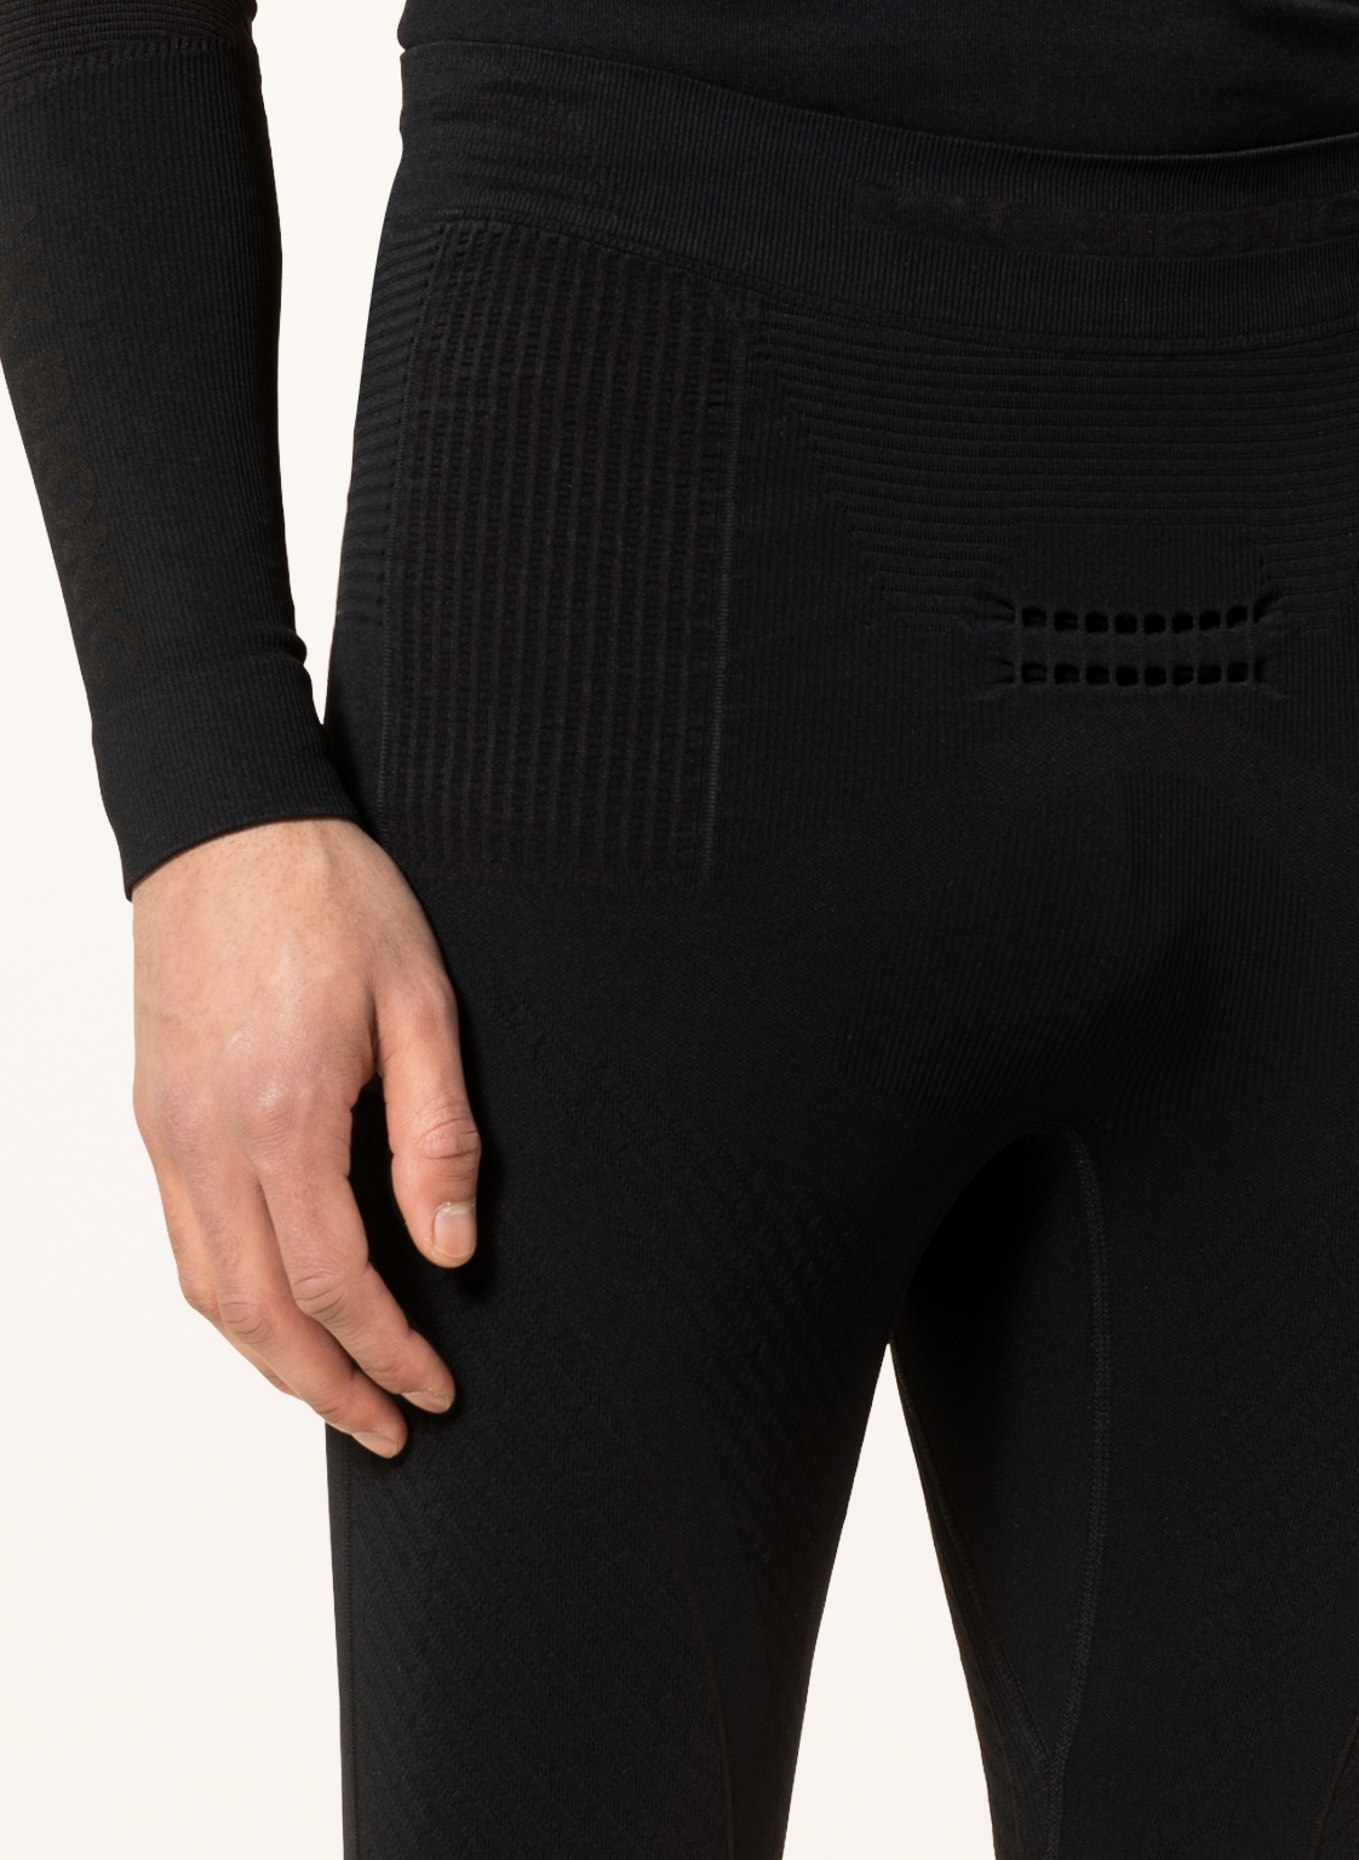 X-BIONIC Functional baselayer trousers ENERGY ACCUMULATOR® 4.0 with cropped leg length, Color: BLACK (Image 5)